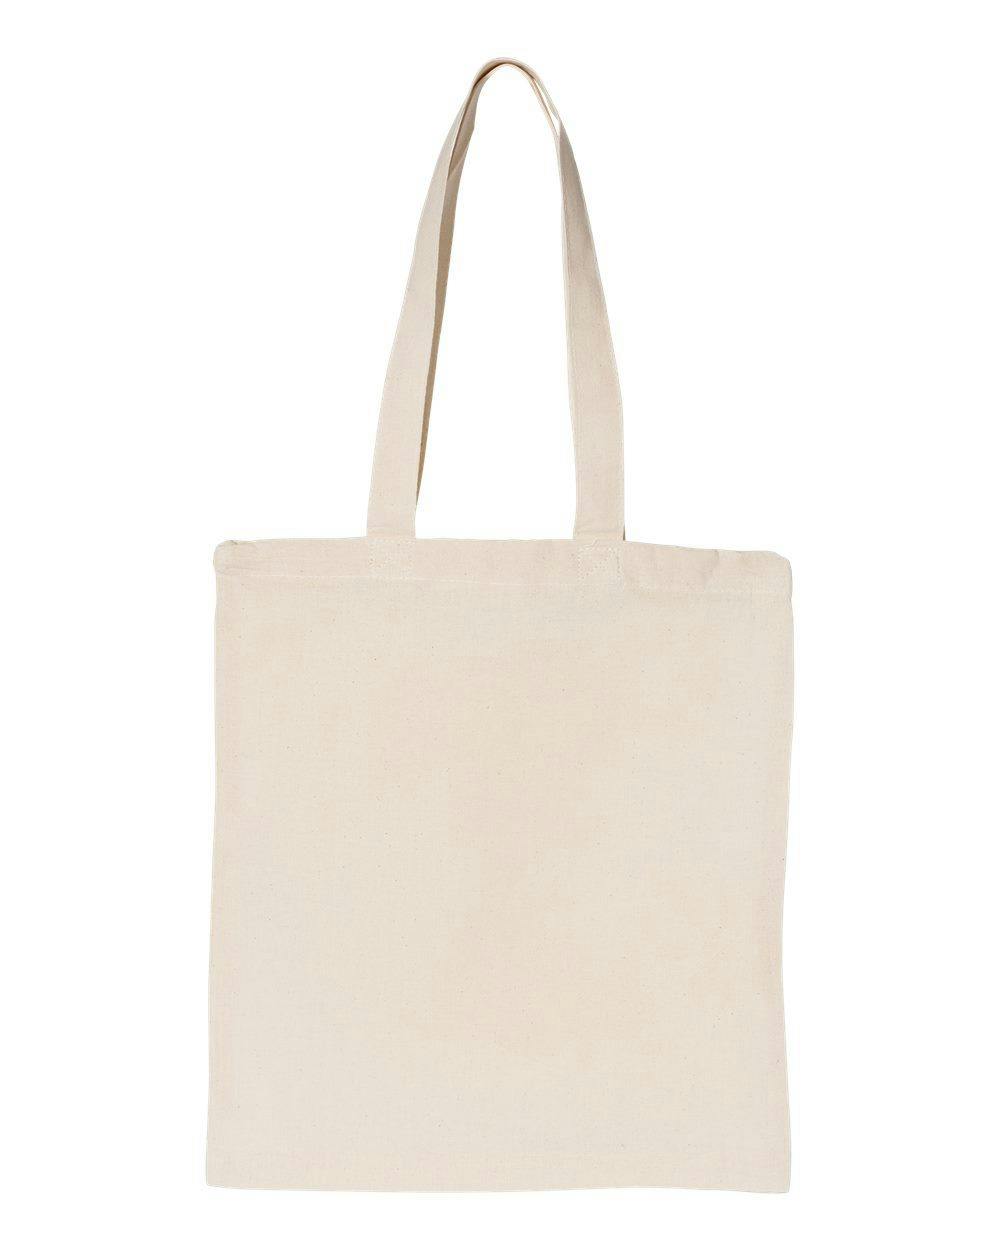 Image for Large Canvas Tote - OAD117